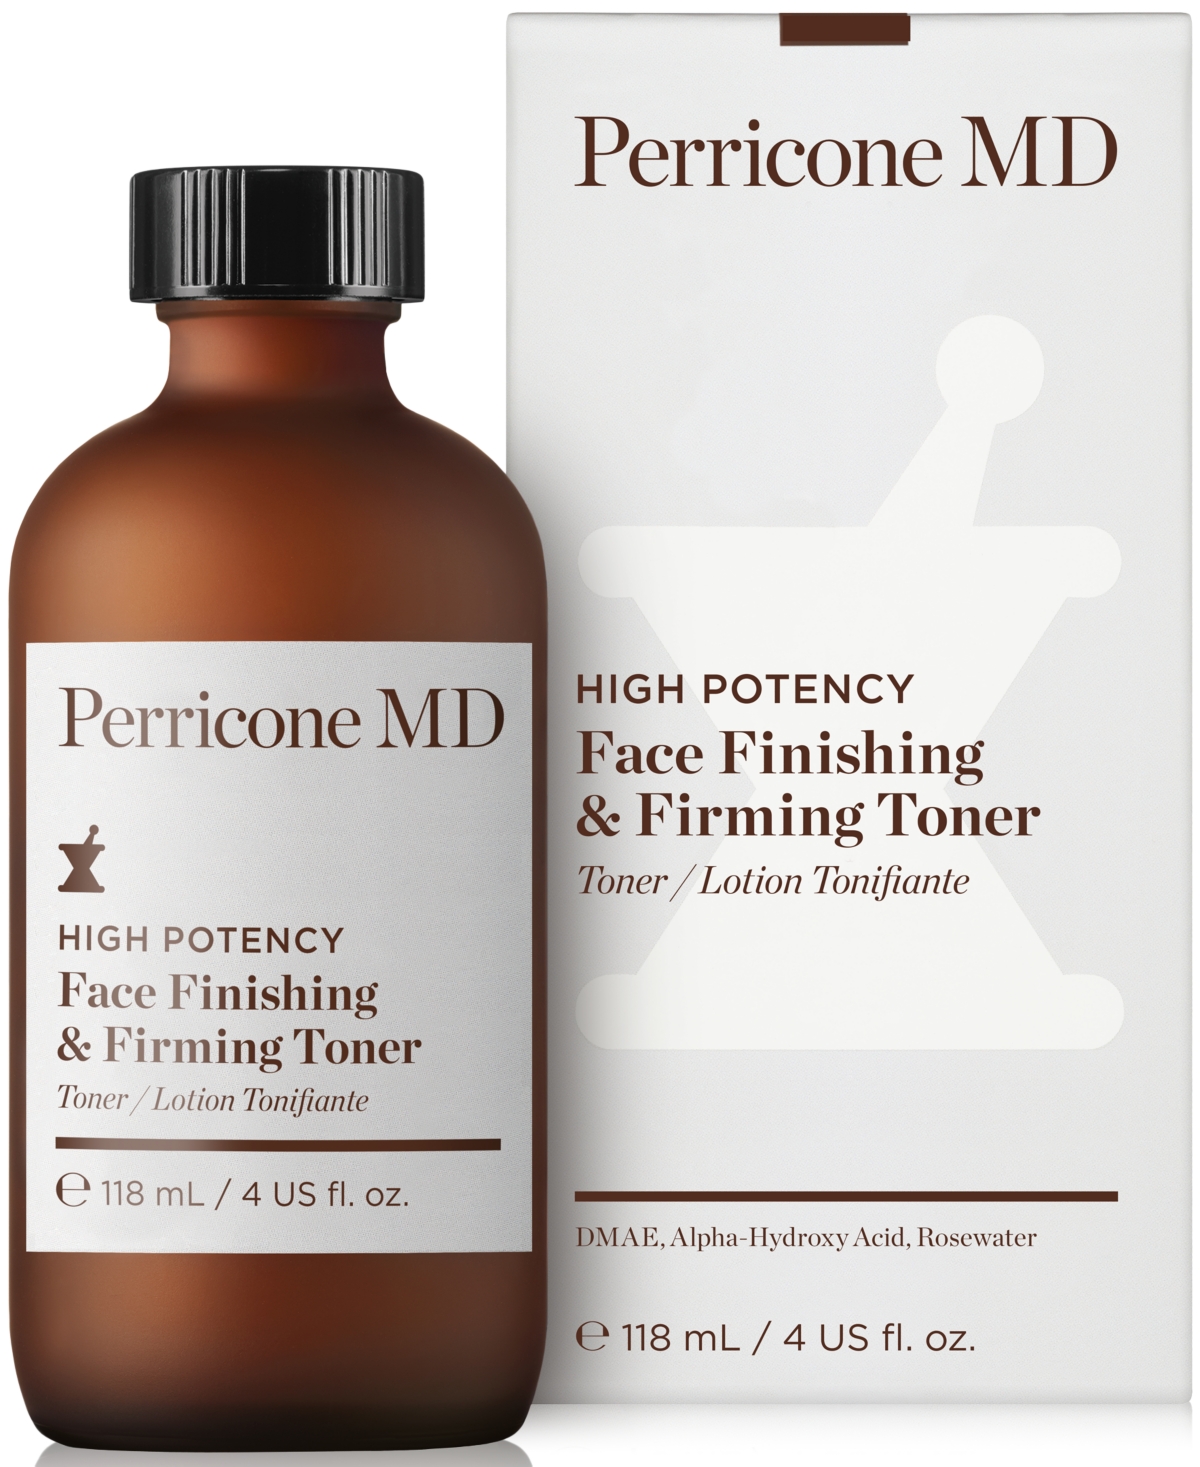 Perricone Md High Potency Face Finishing & Firming Toner, 4 Oz.